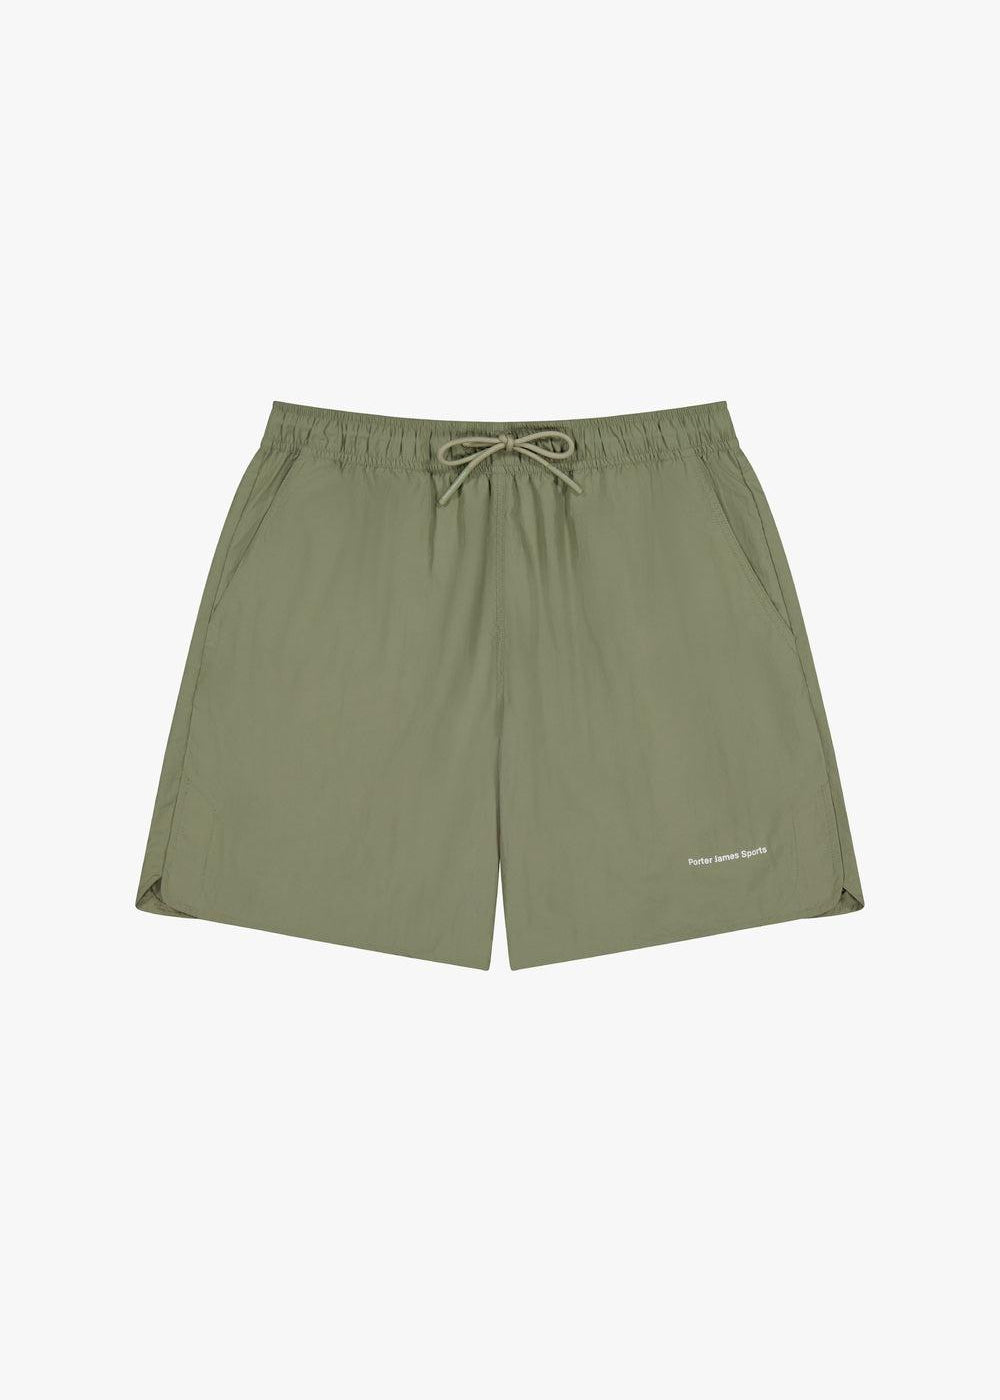 Porter James Sports Saturday Shorts - Olive | PORTER JAMES SPORTS | Mad About The Boy